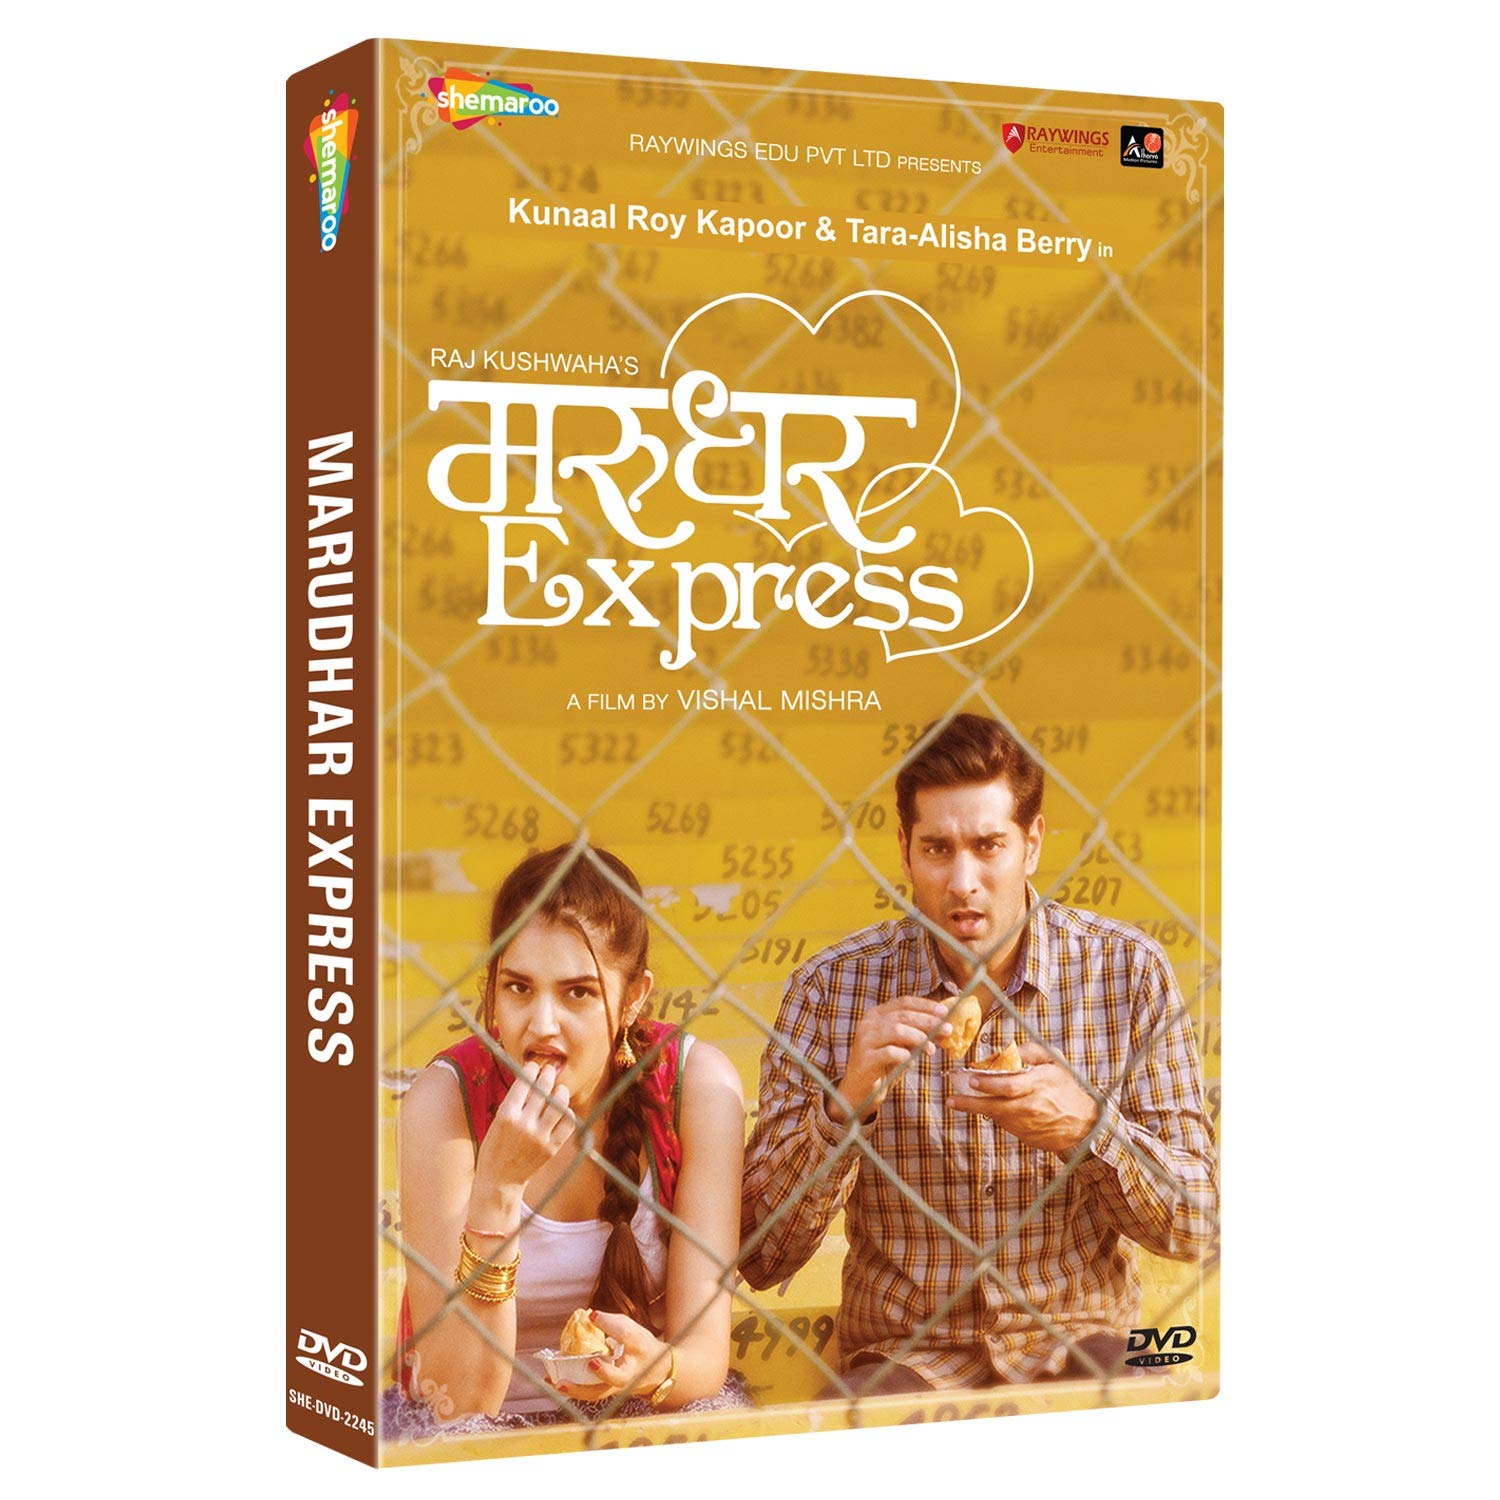 marudhar-express-movie-purchase-or-watch-online